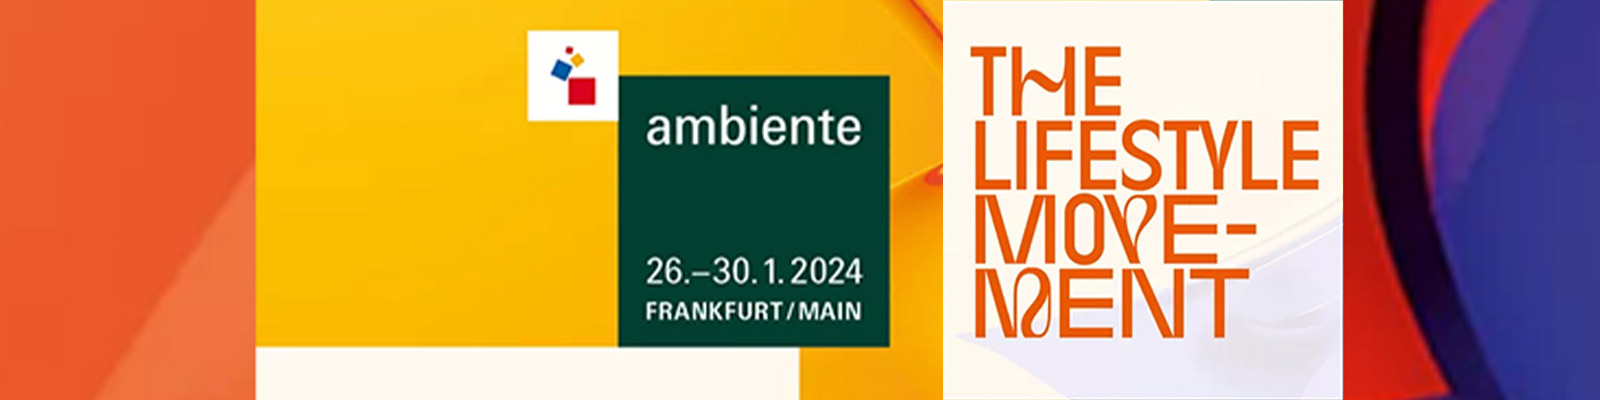 AMBIENTE 26 - 30 JANUARY 2024 - Beautiful and Strong